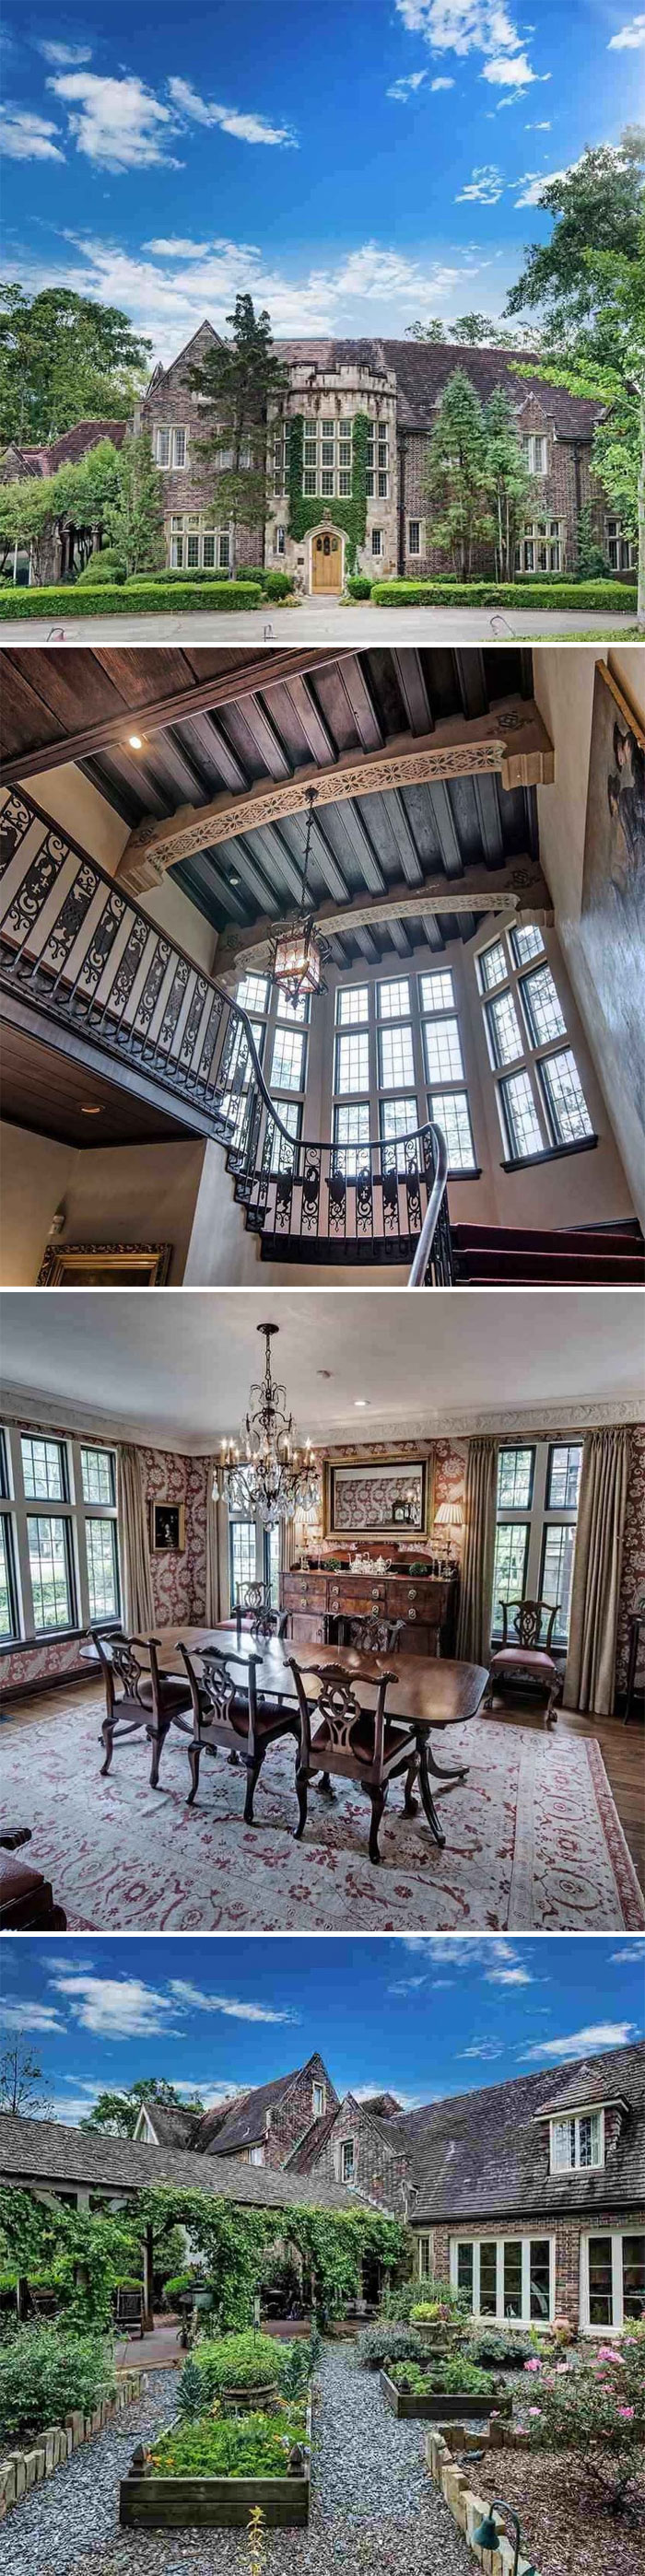 If You Just Happened To Be In The Market For A New Castle We Have A Lot Of Castles For You Today For #zgwcastlefridays🏰 And The First One Is A Over 7,500 Sq Ft Castle In Jackson, Ms. Currently Listed For $1,475,000 On 2 Acres. 6 Bd, 8 Ba. 7,542 Sq Ft. 2 Acres